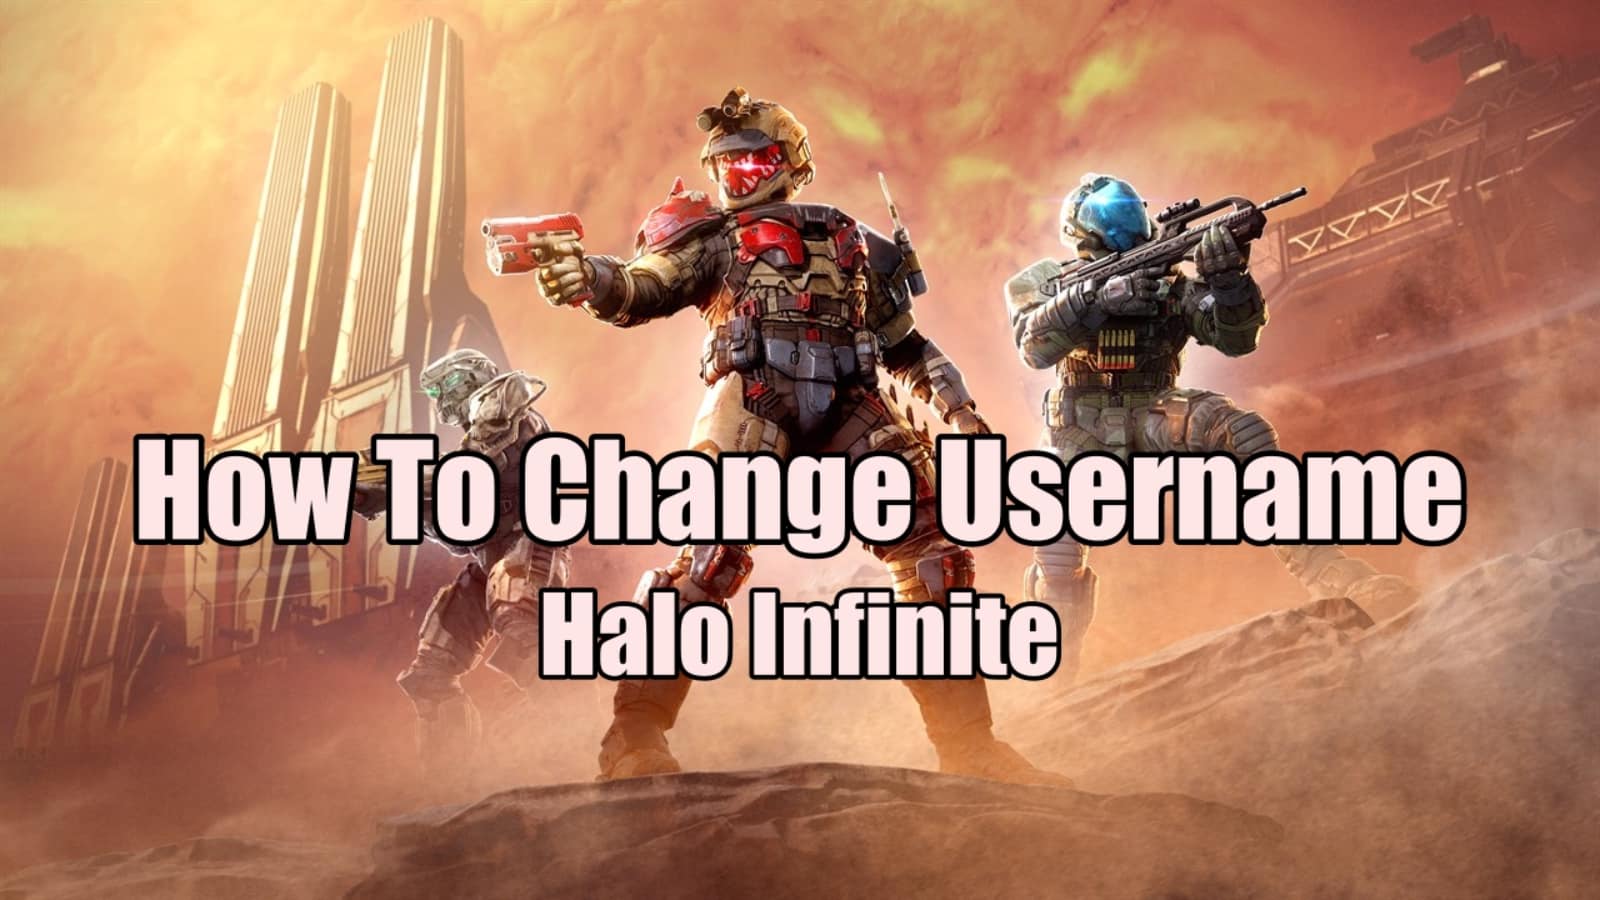 How To Change Gamertag in Halo Infinite